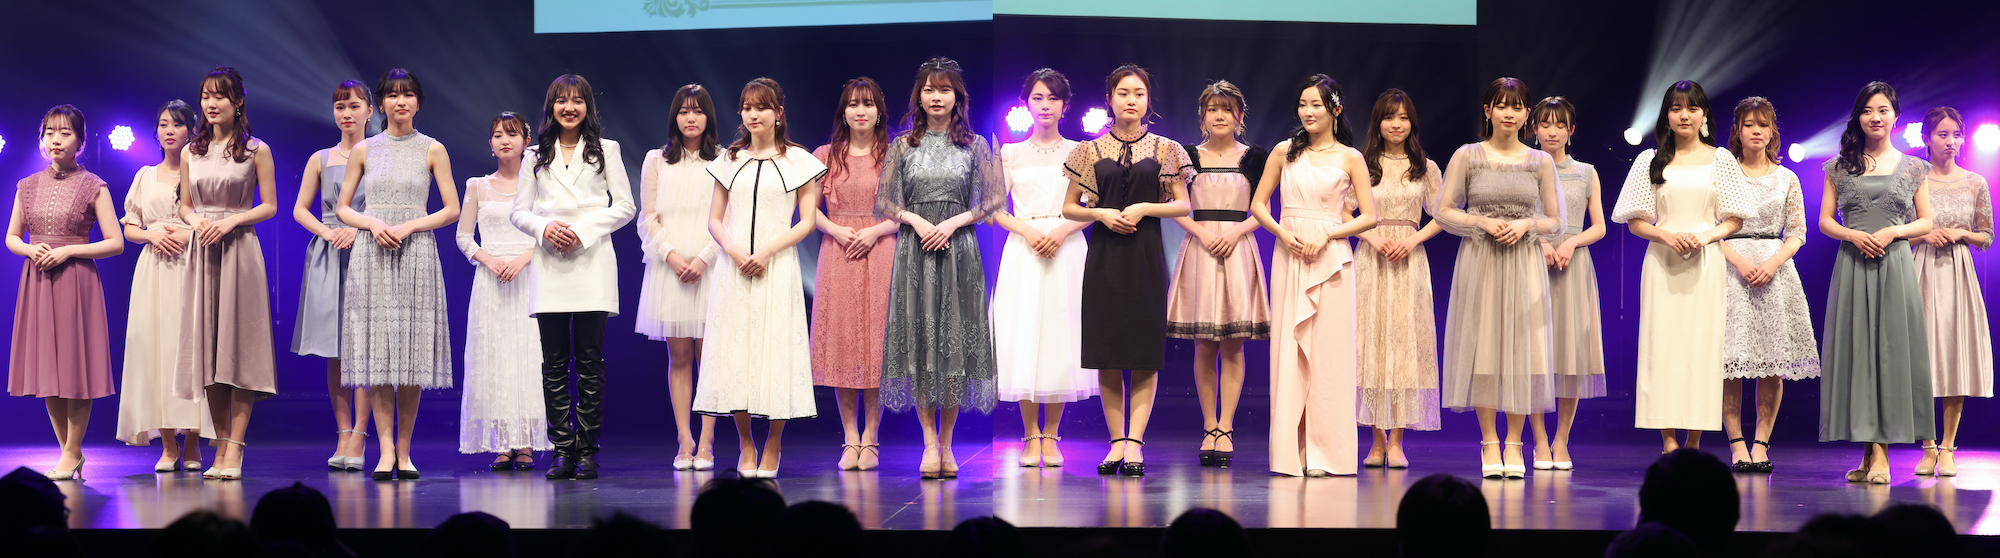 『MISS OF MISS CAMPUS QUEEN CONTEST 2022 supported by ACNAL』（ミスオブミスキャンパスクイーンコンテスト）ファイナリスト22名